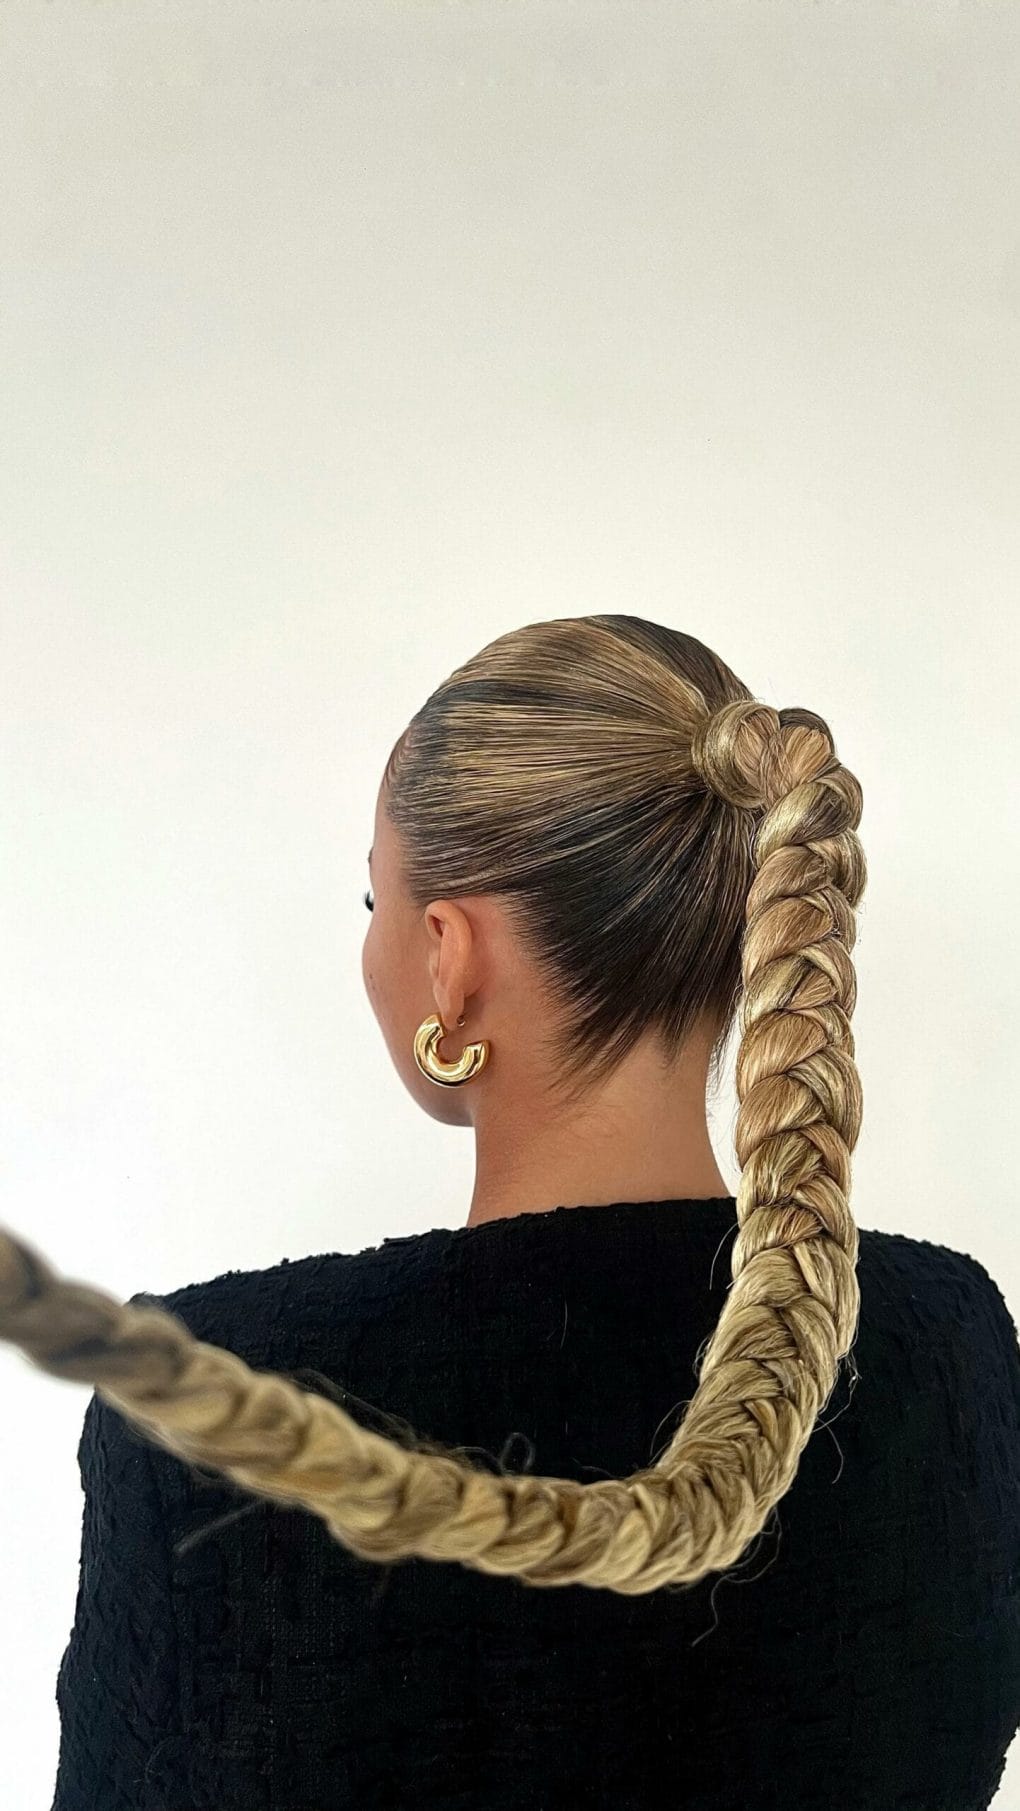 Sleek blonde ponytail evolving into a tight rope braid, ideal for intense workouts